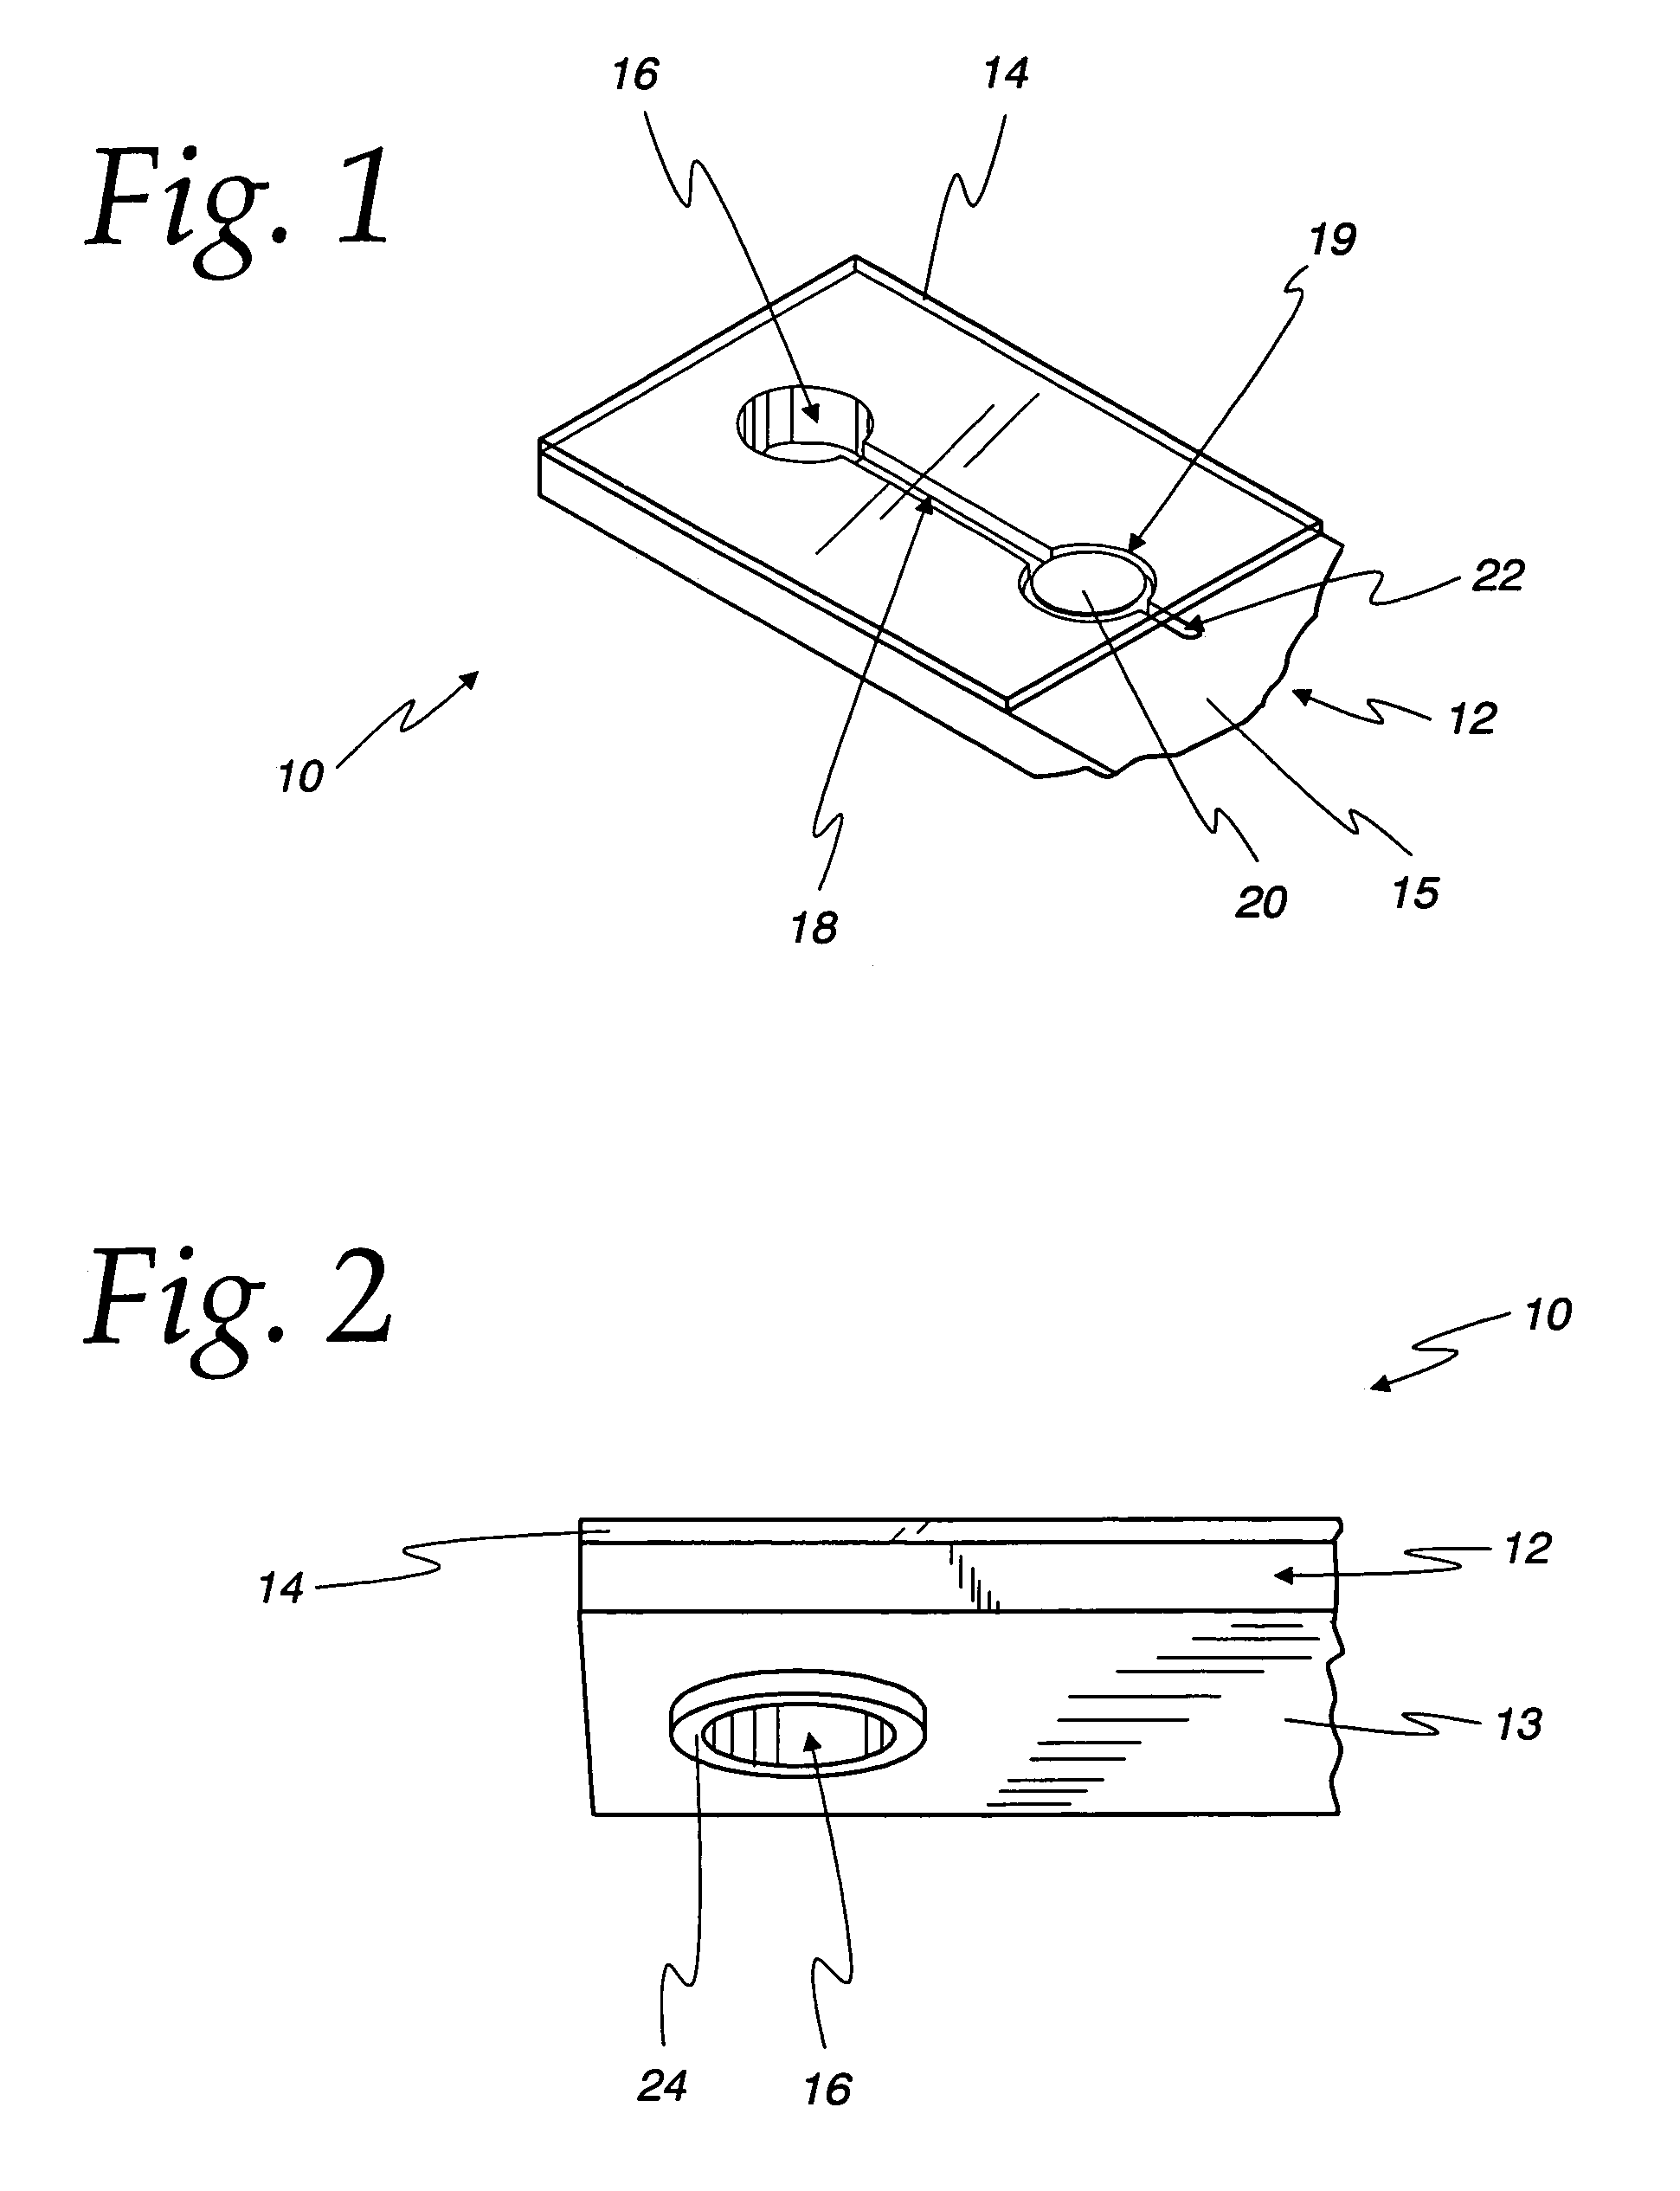 Diagnostic test strip for collecting and detecting an analyte in a fluid sample